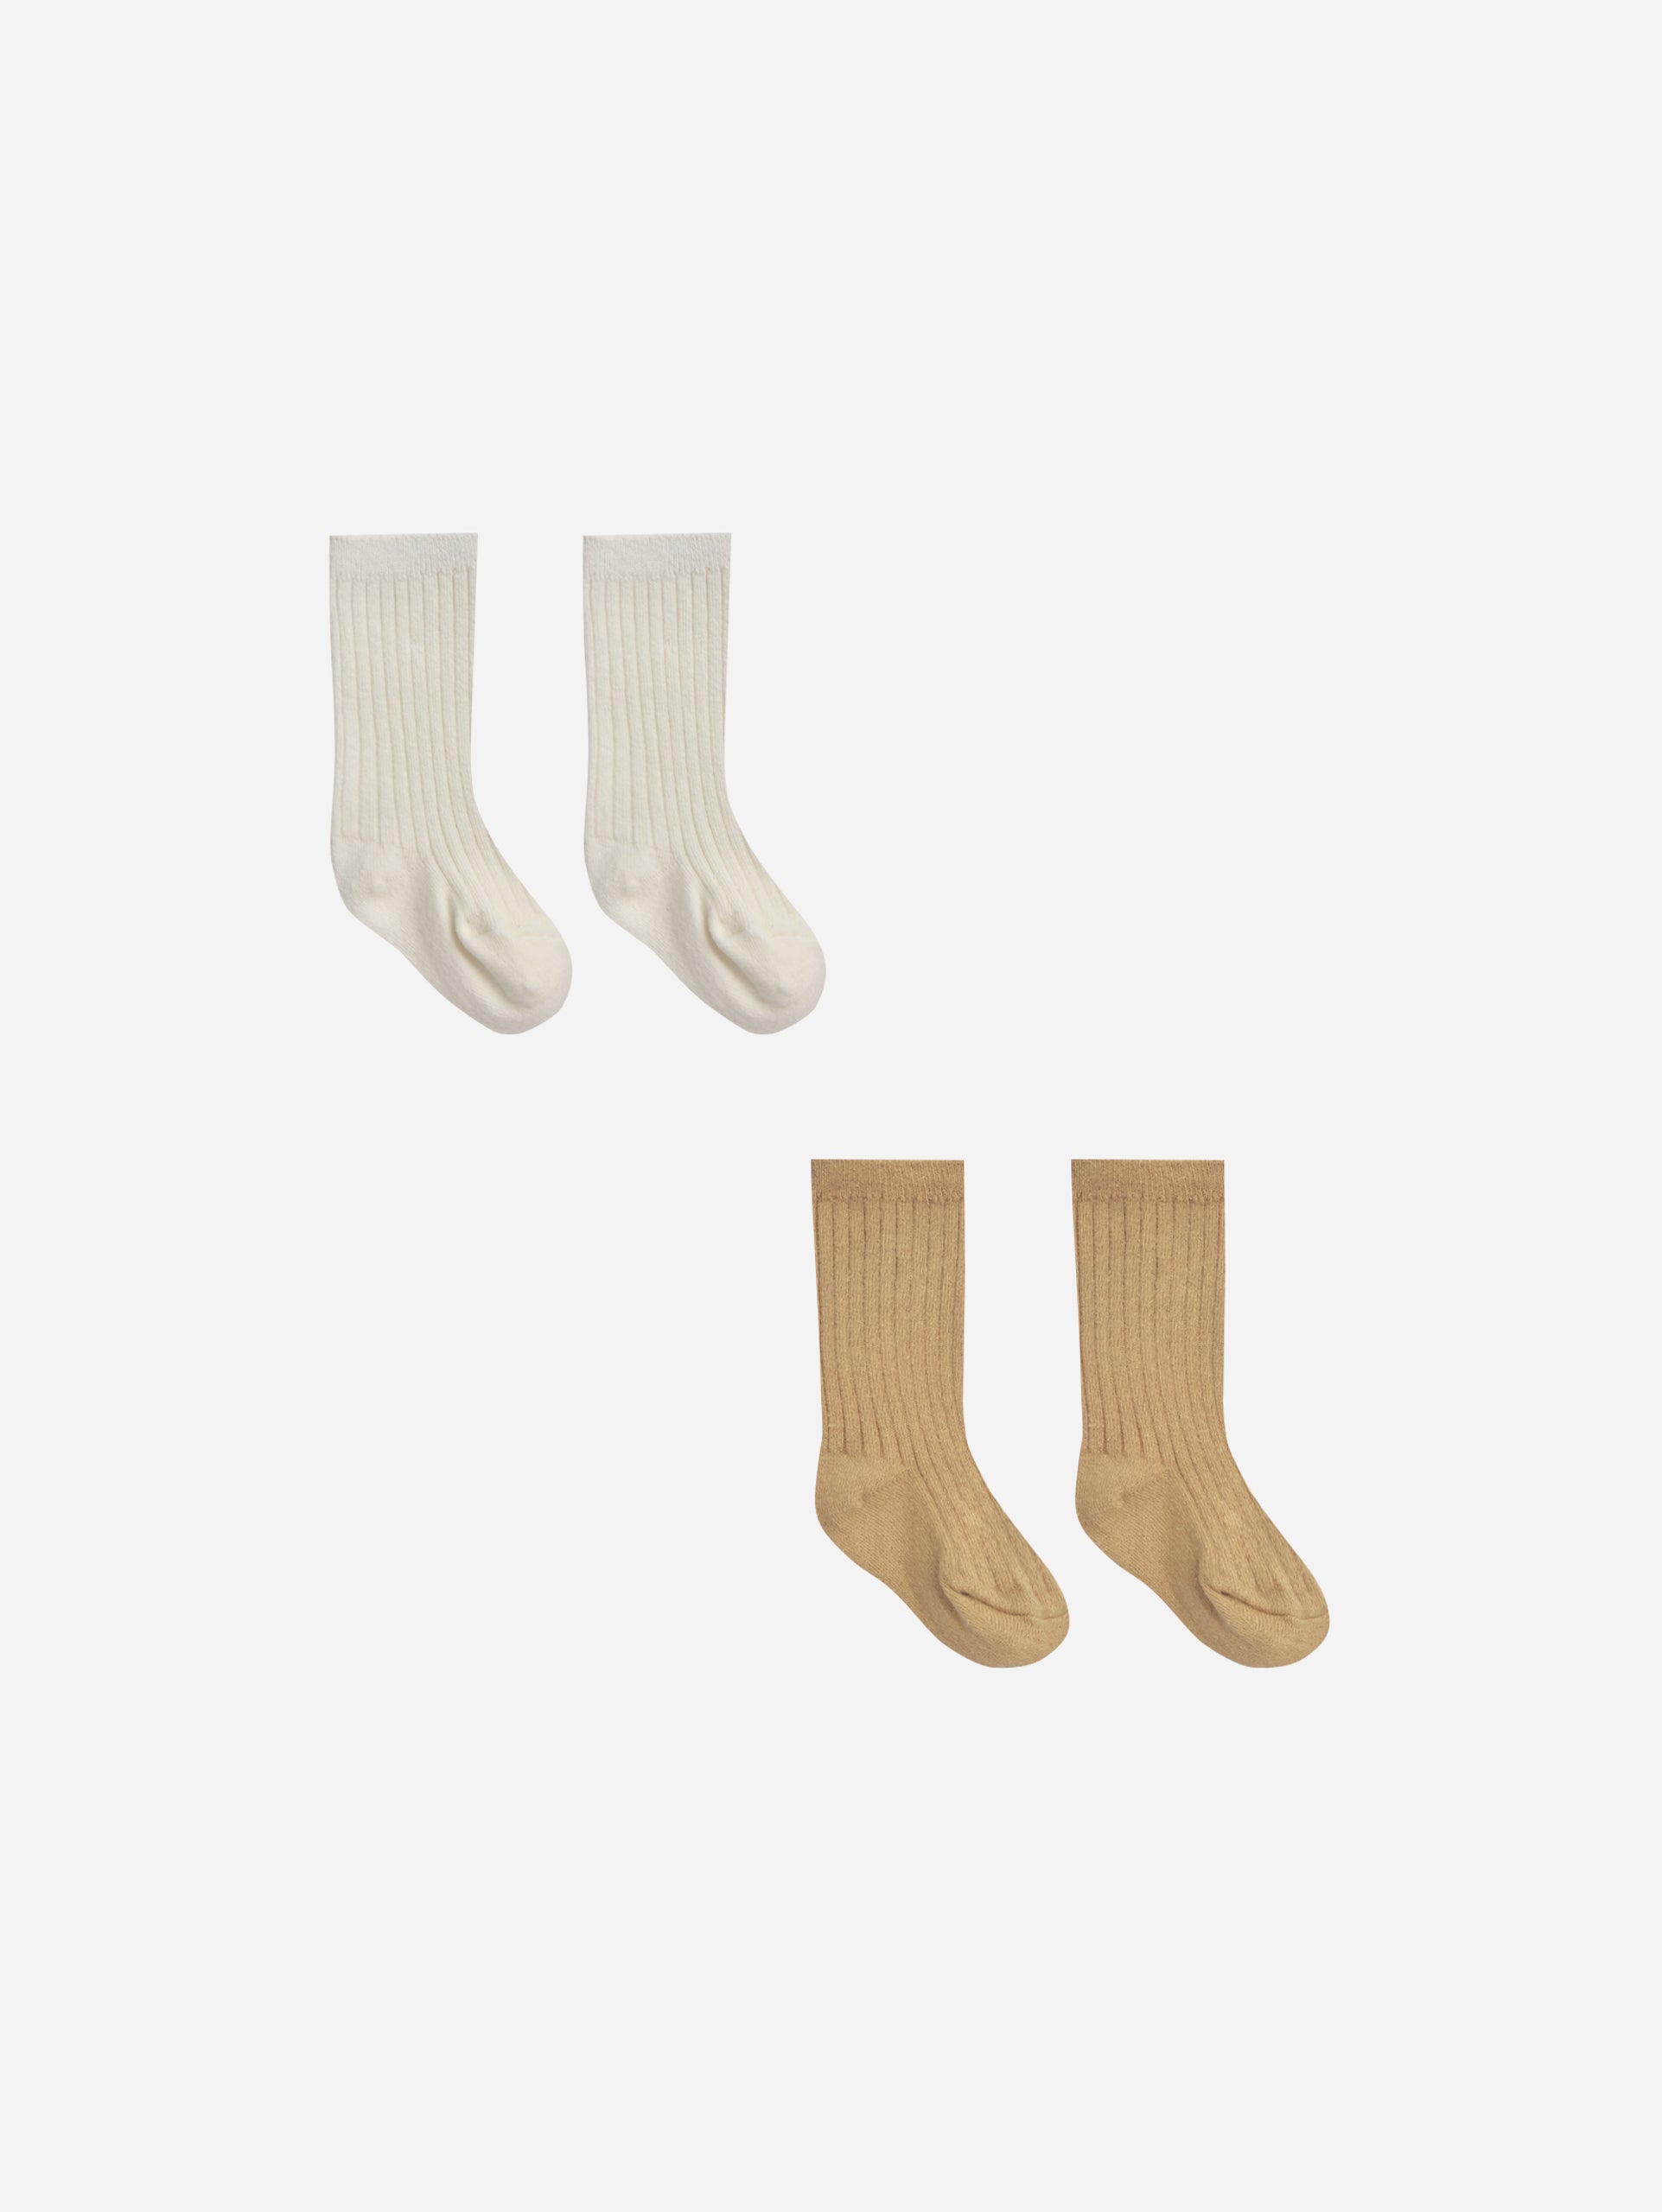 Socks Set || Ivory, Honey - Rylee + Cru | Kids Clothes | Trendy Baby Clothes | Modern Infant Outfits |